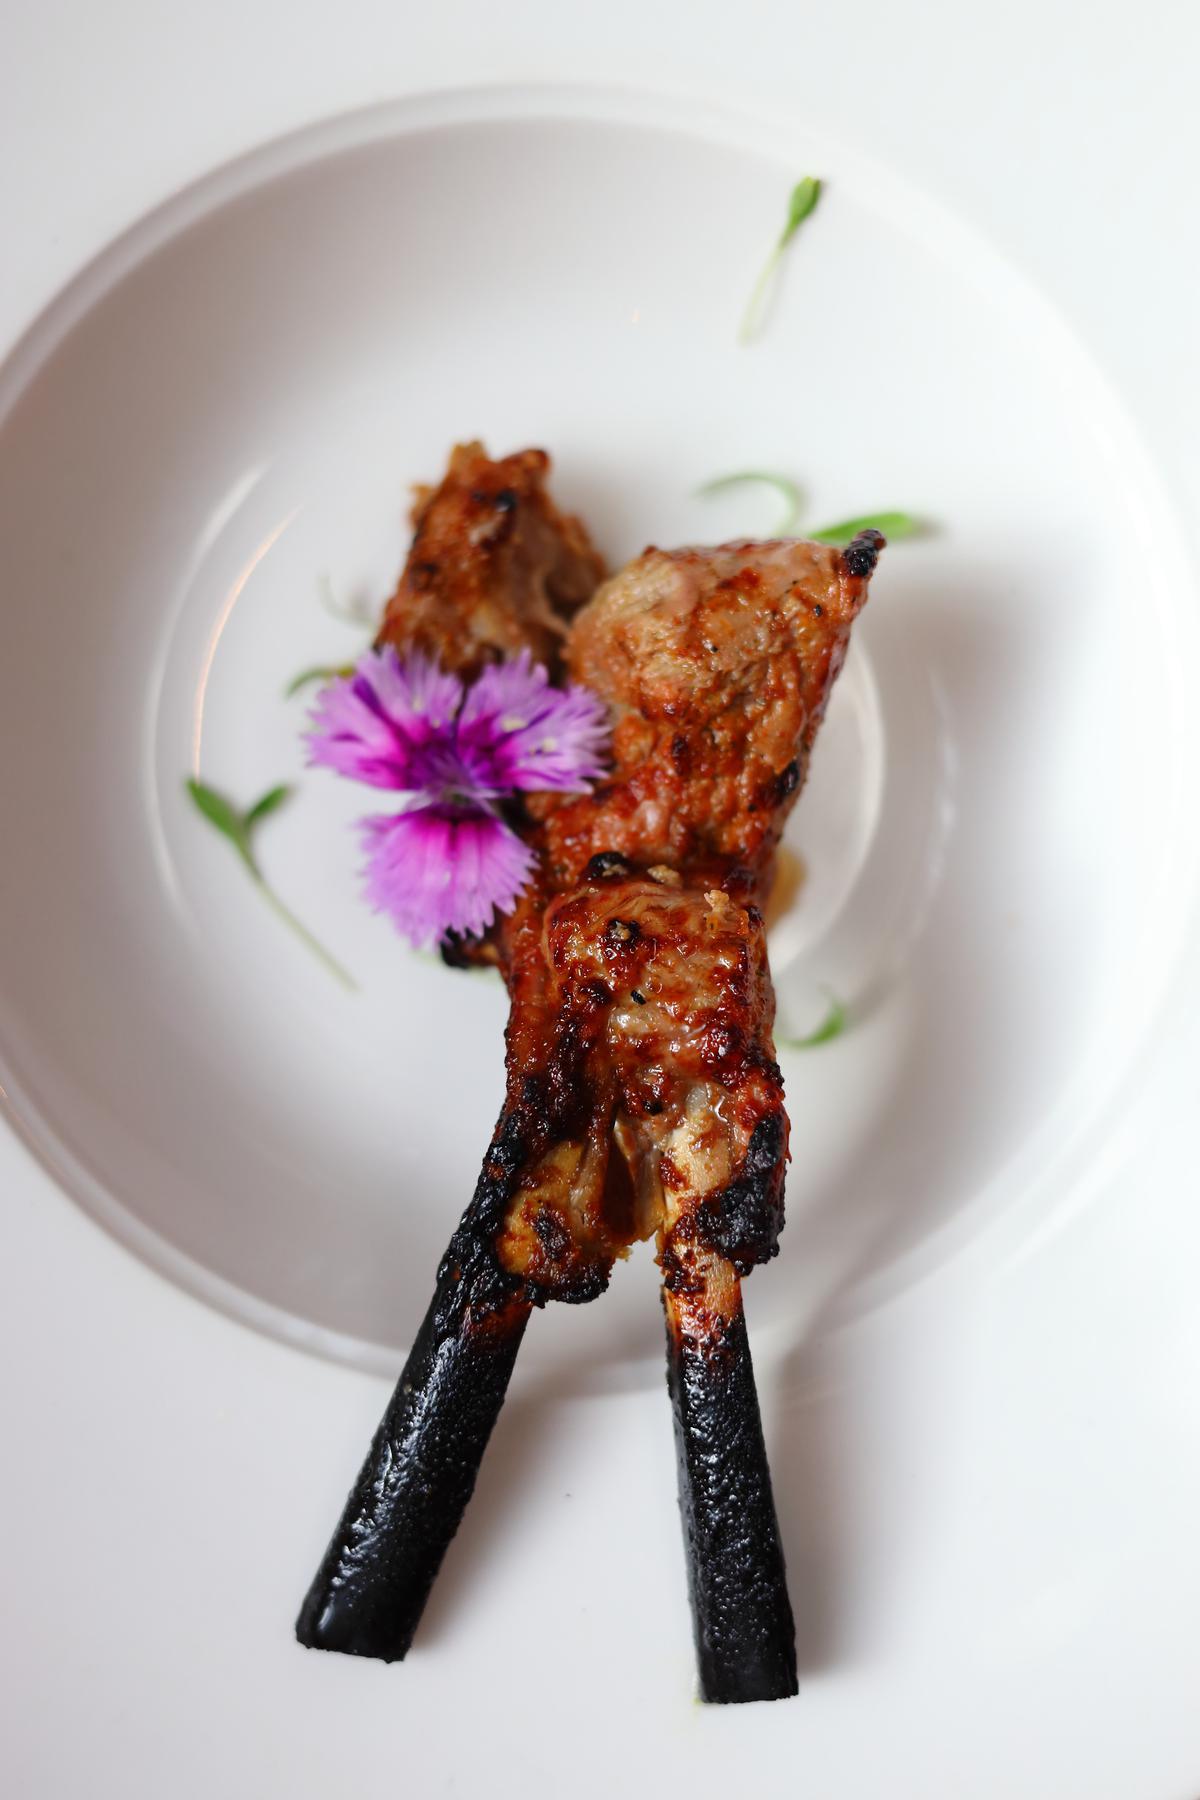 Bandra styled grilled lamb chop with bottle masala at Michael swamy Roseate pop-up